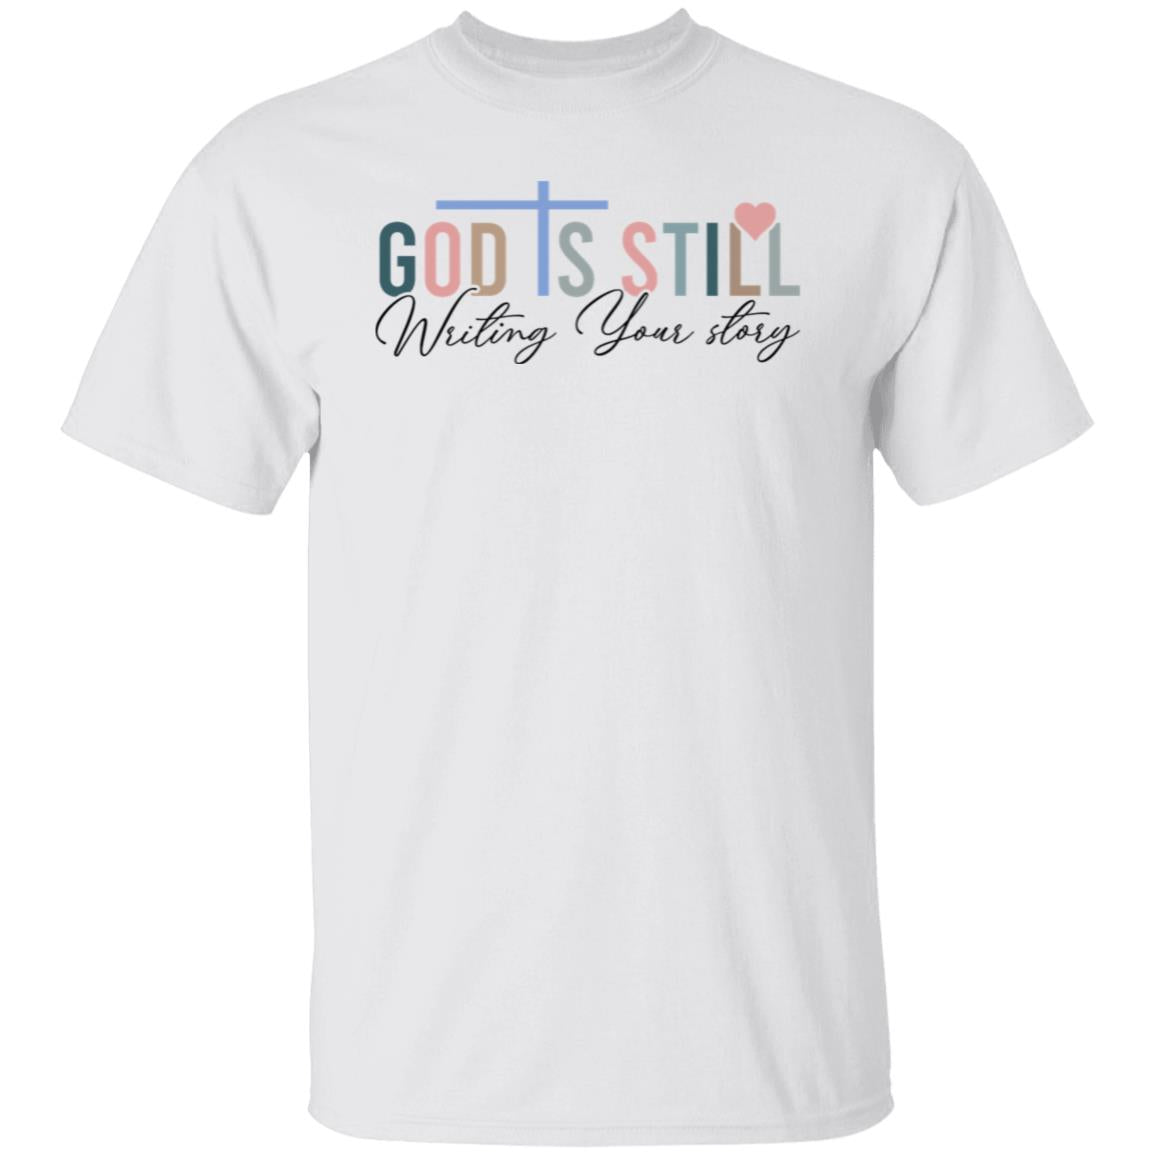 God is Still Writing Your Story 5.3 oz. T-Shirt